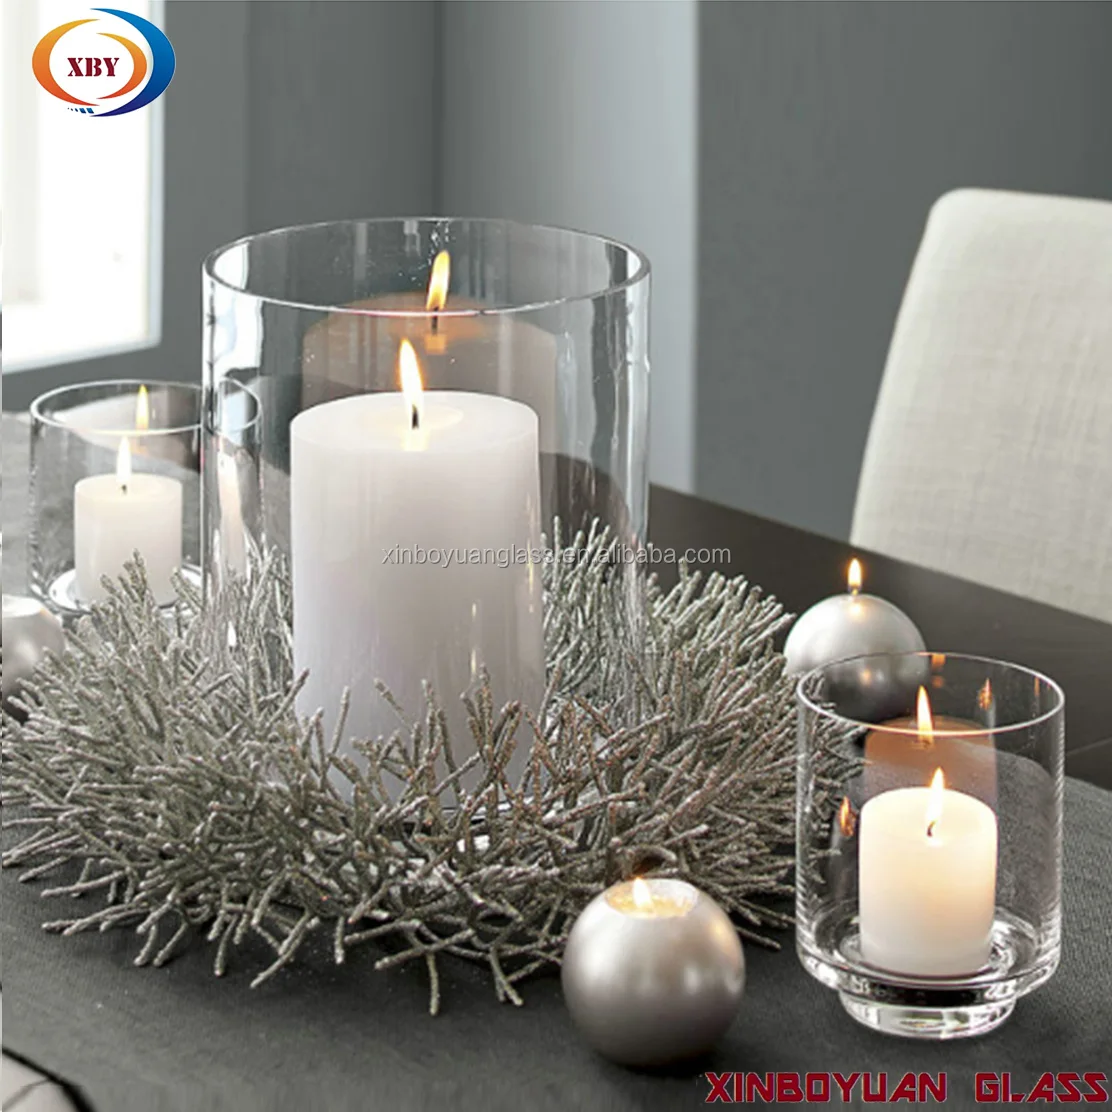 Crate and barrel glass candle holders